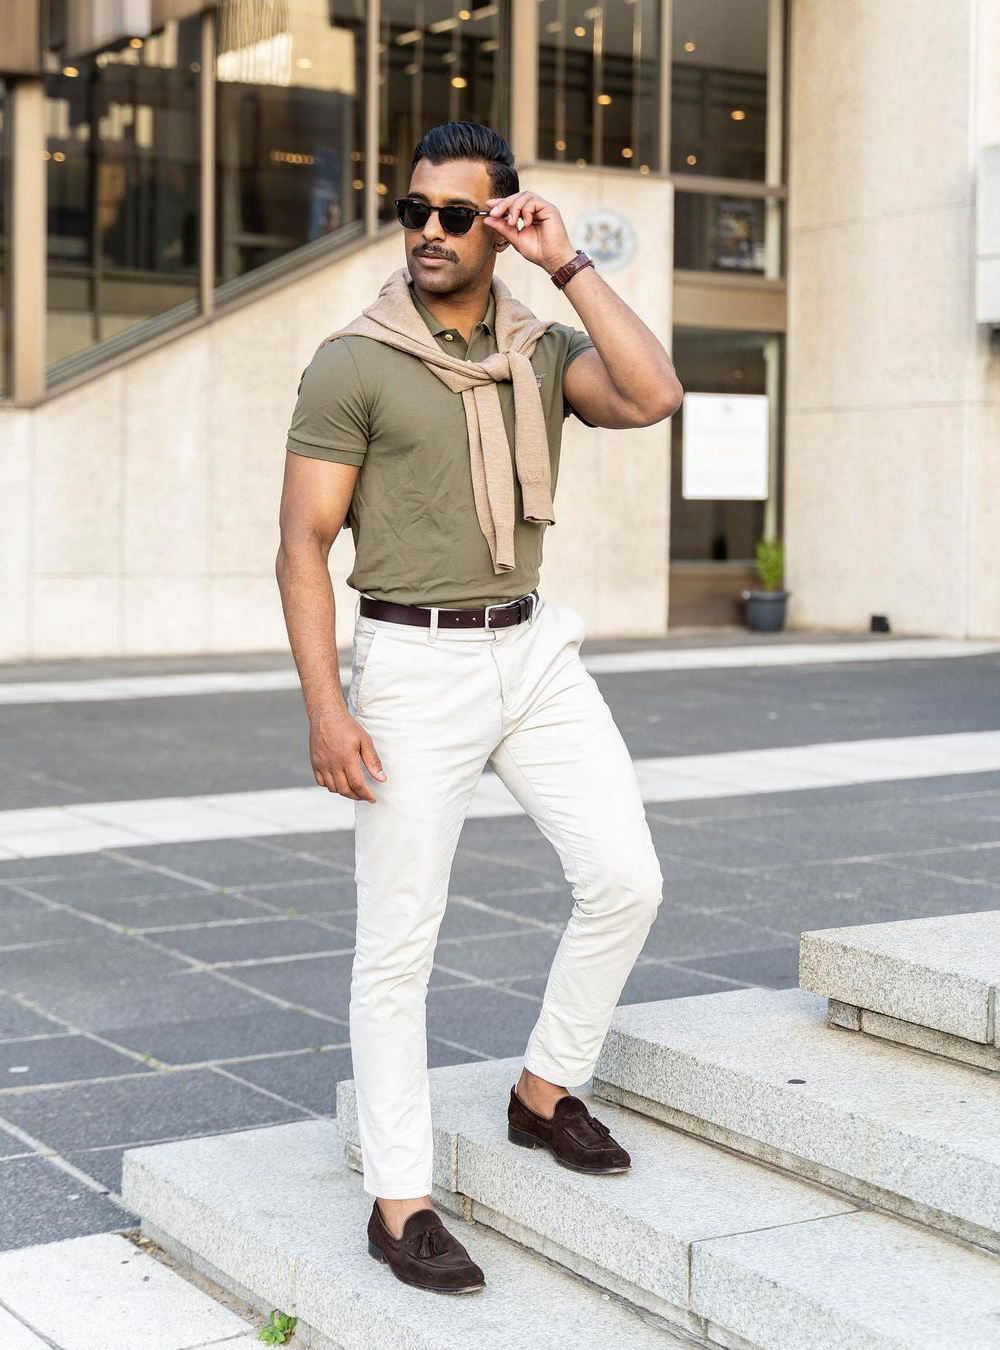 tan-sweater-over-olive-green-polo-shirt-white-pants-brown-loafers.jpg